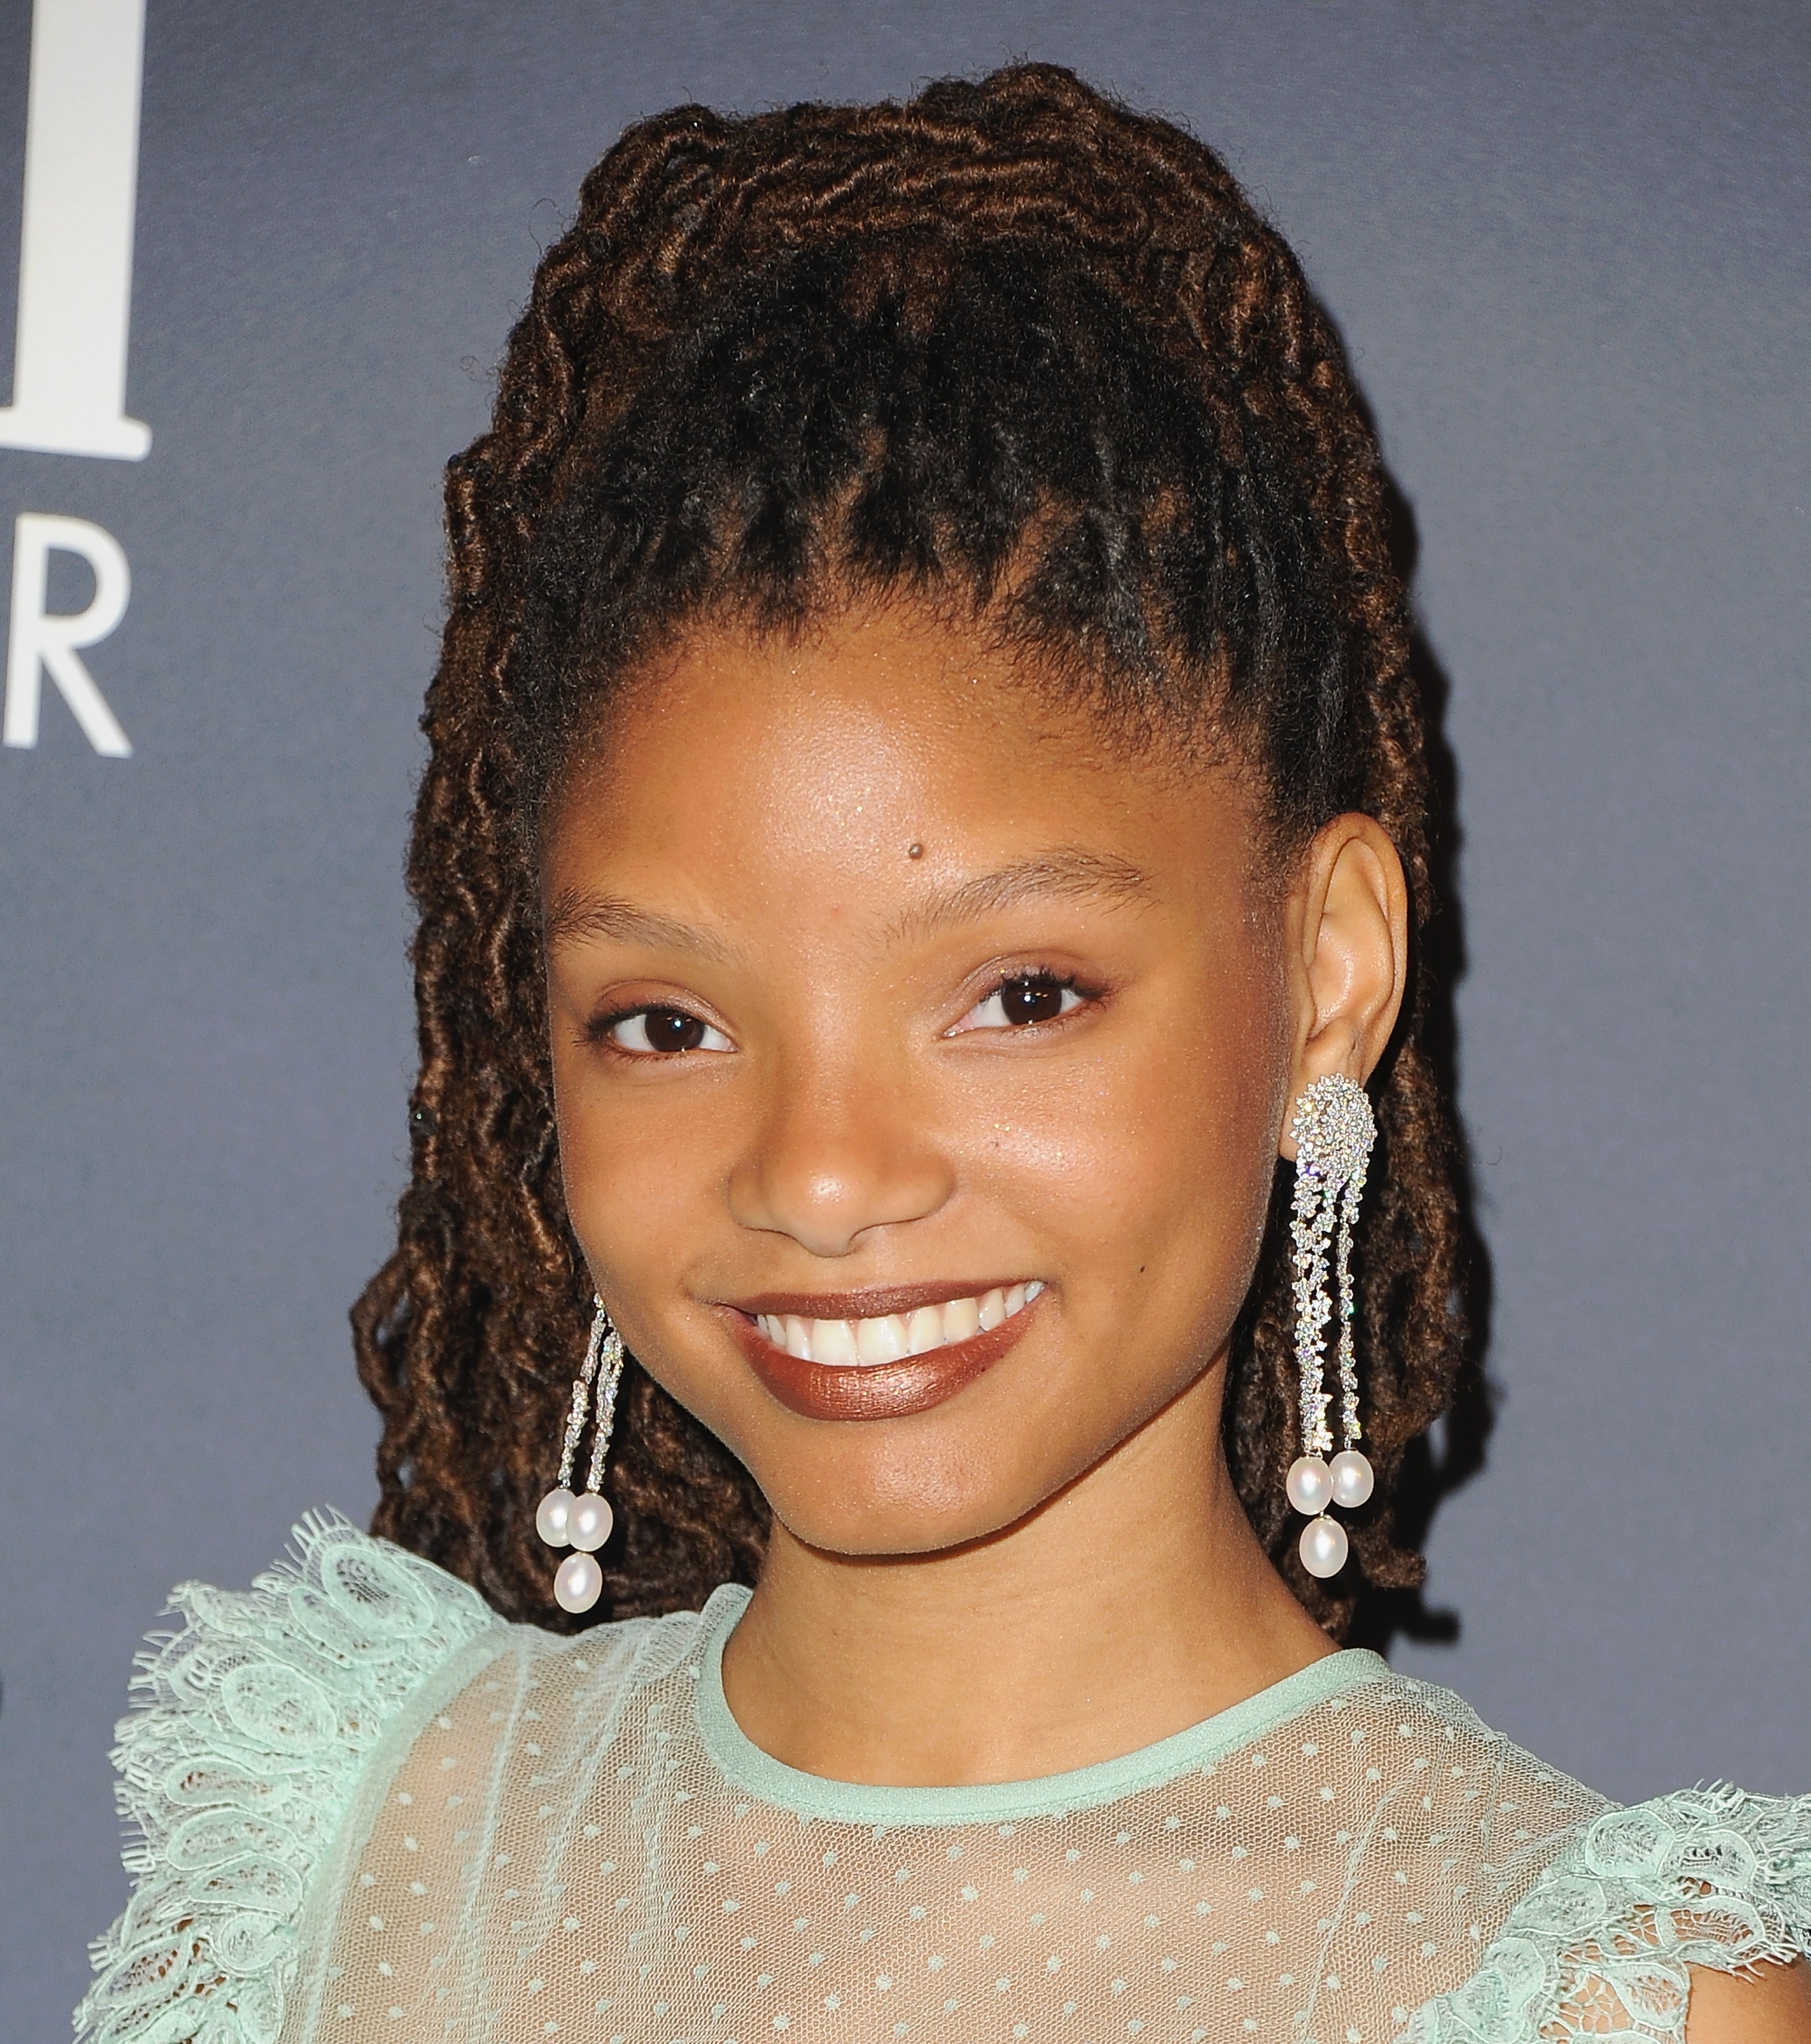 Halle Bailey at the 3rd Annual InStyle Awards - Arrivals